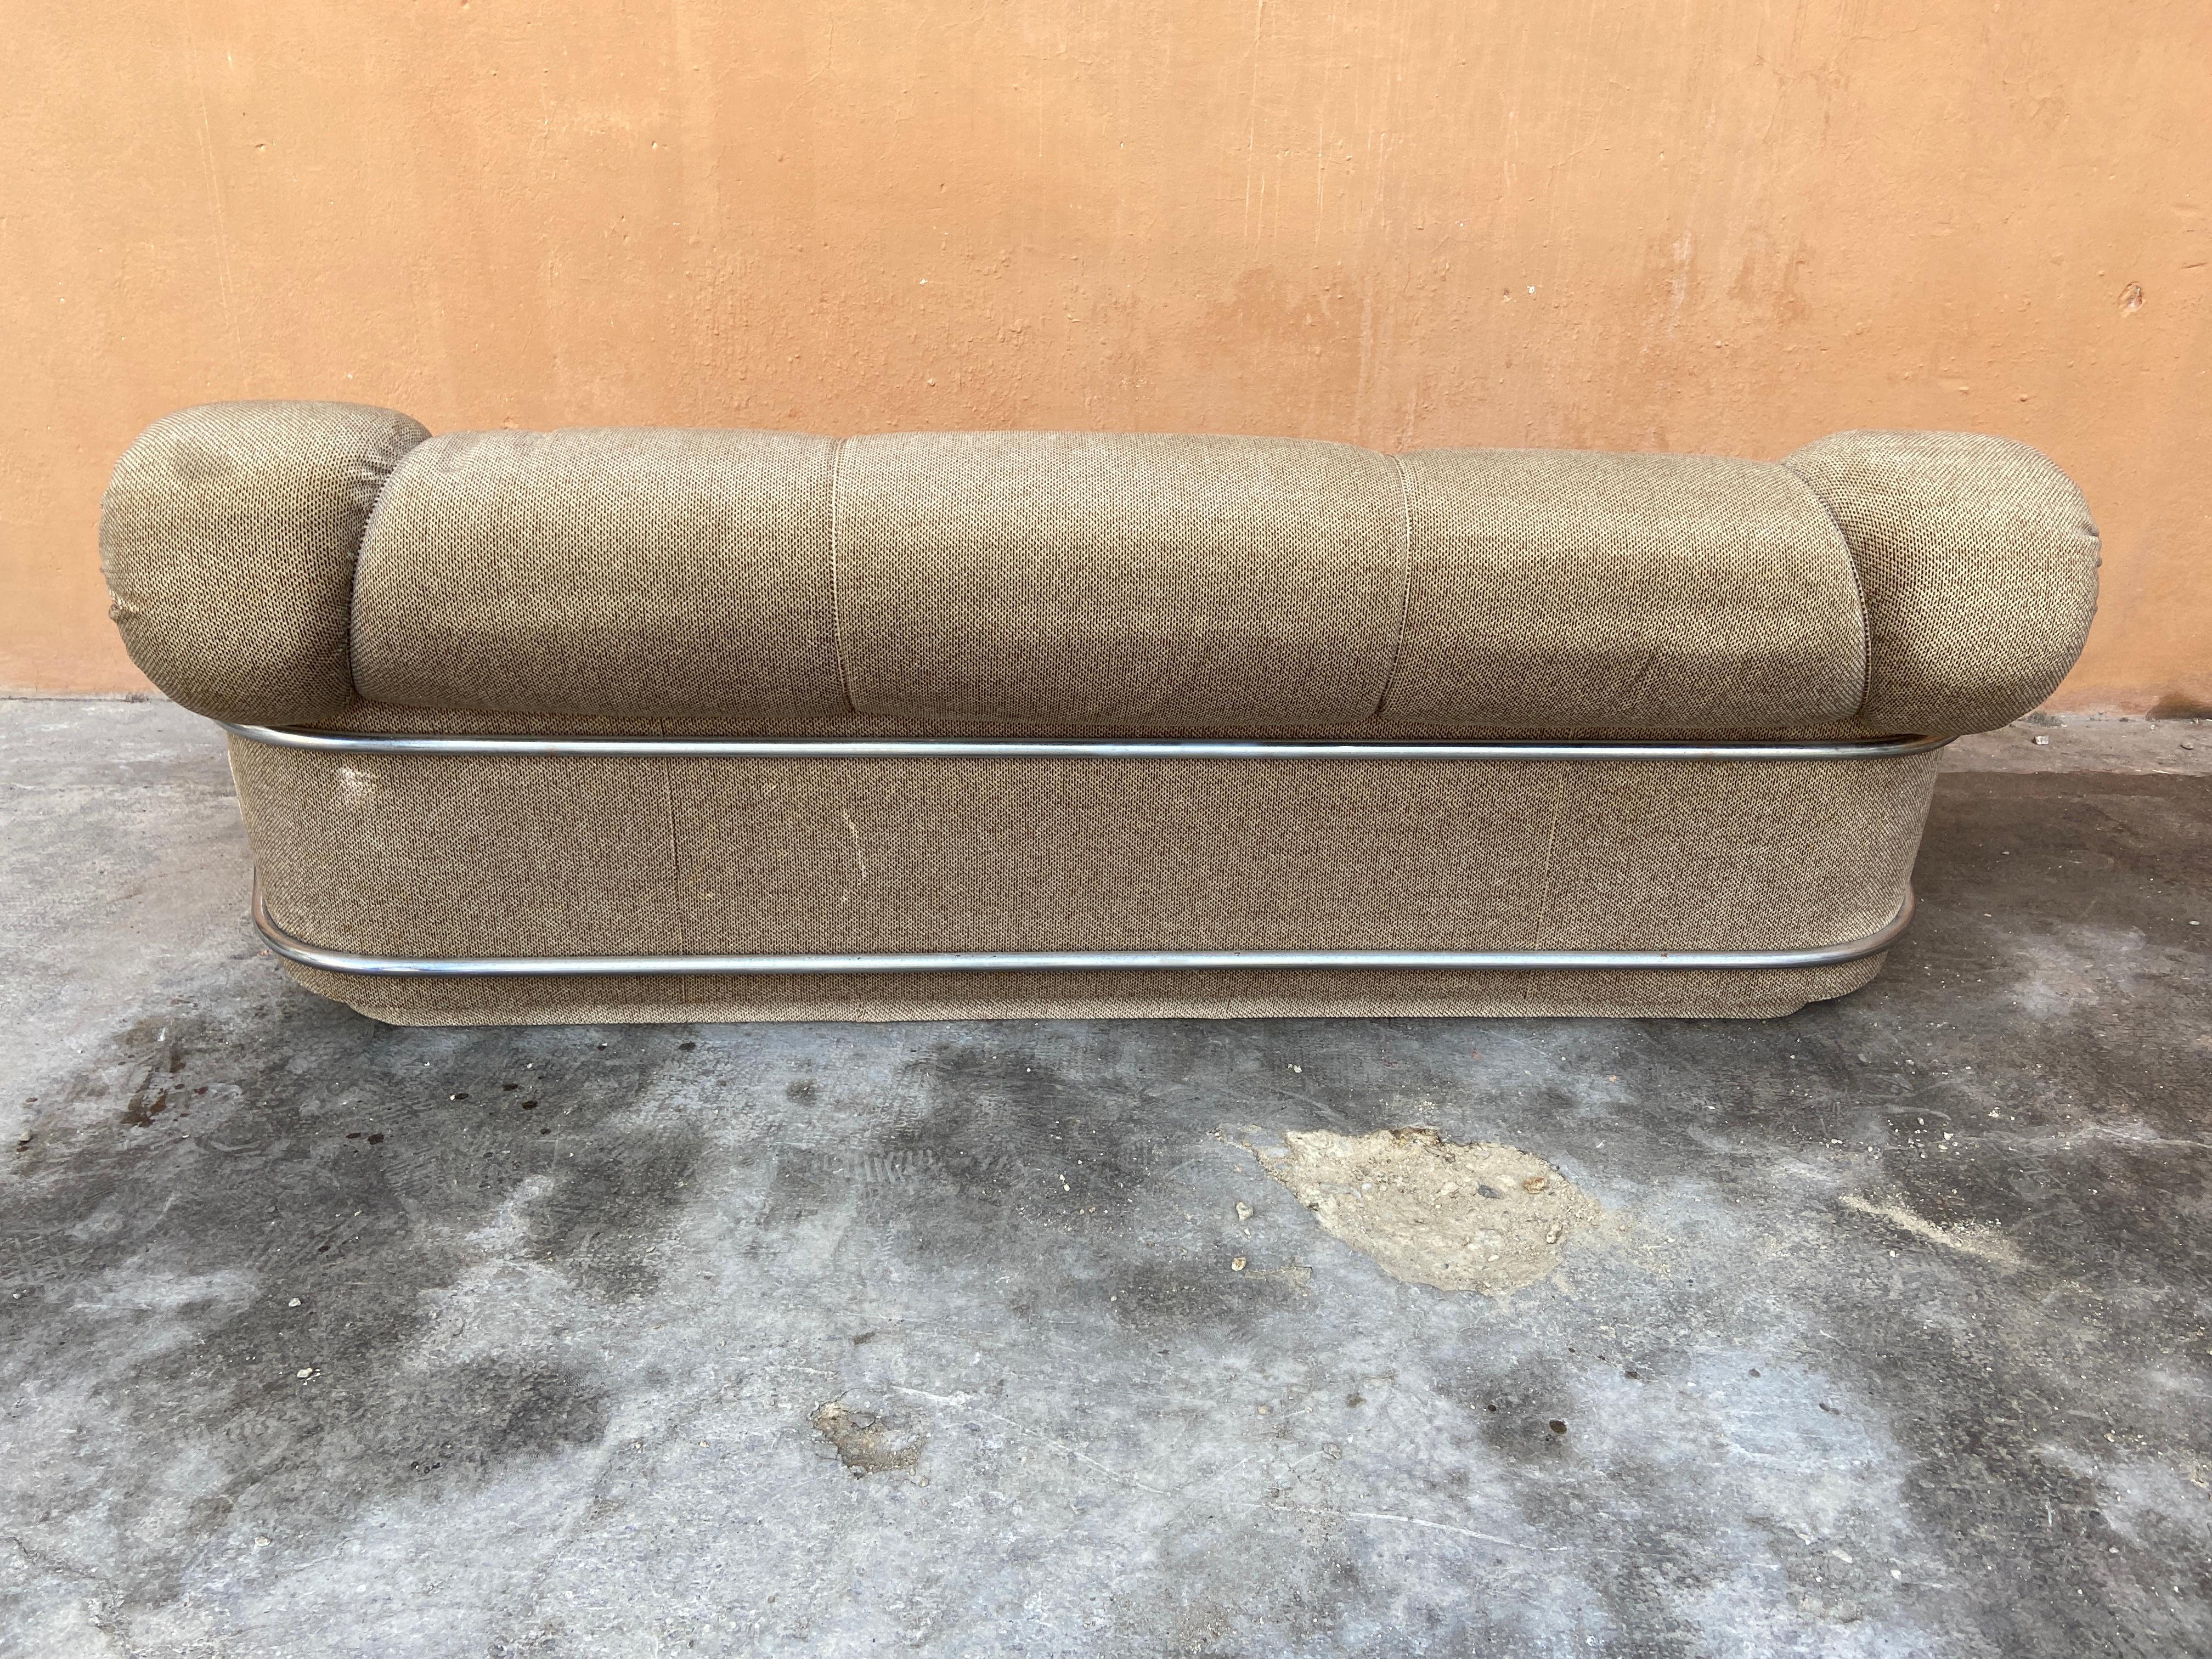 Late 20th Century Mid-Century Modern Italian Velvet Sofa with Chrome Structure, 1970s For Sale